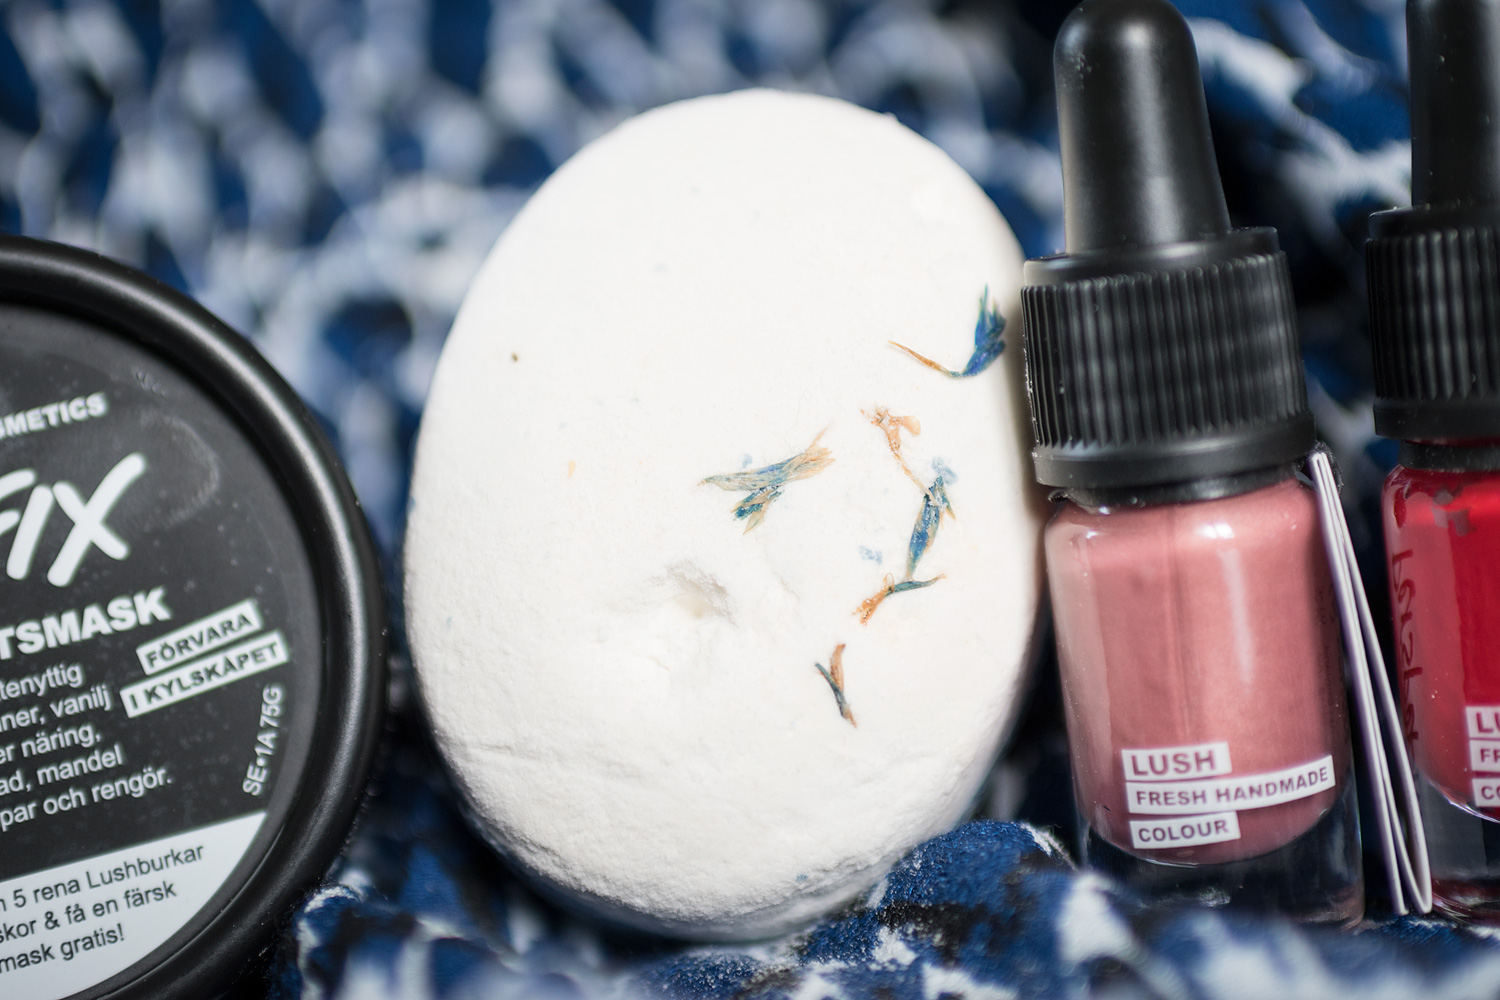 lush oatifix t'eo deo tender is the night lip color